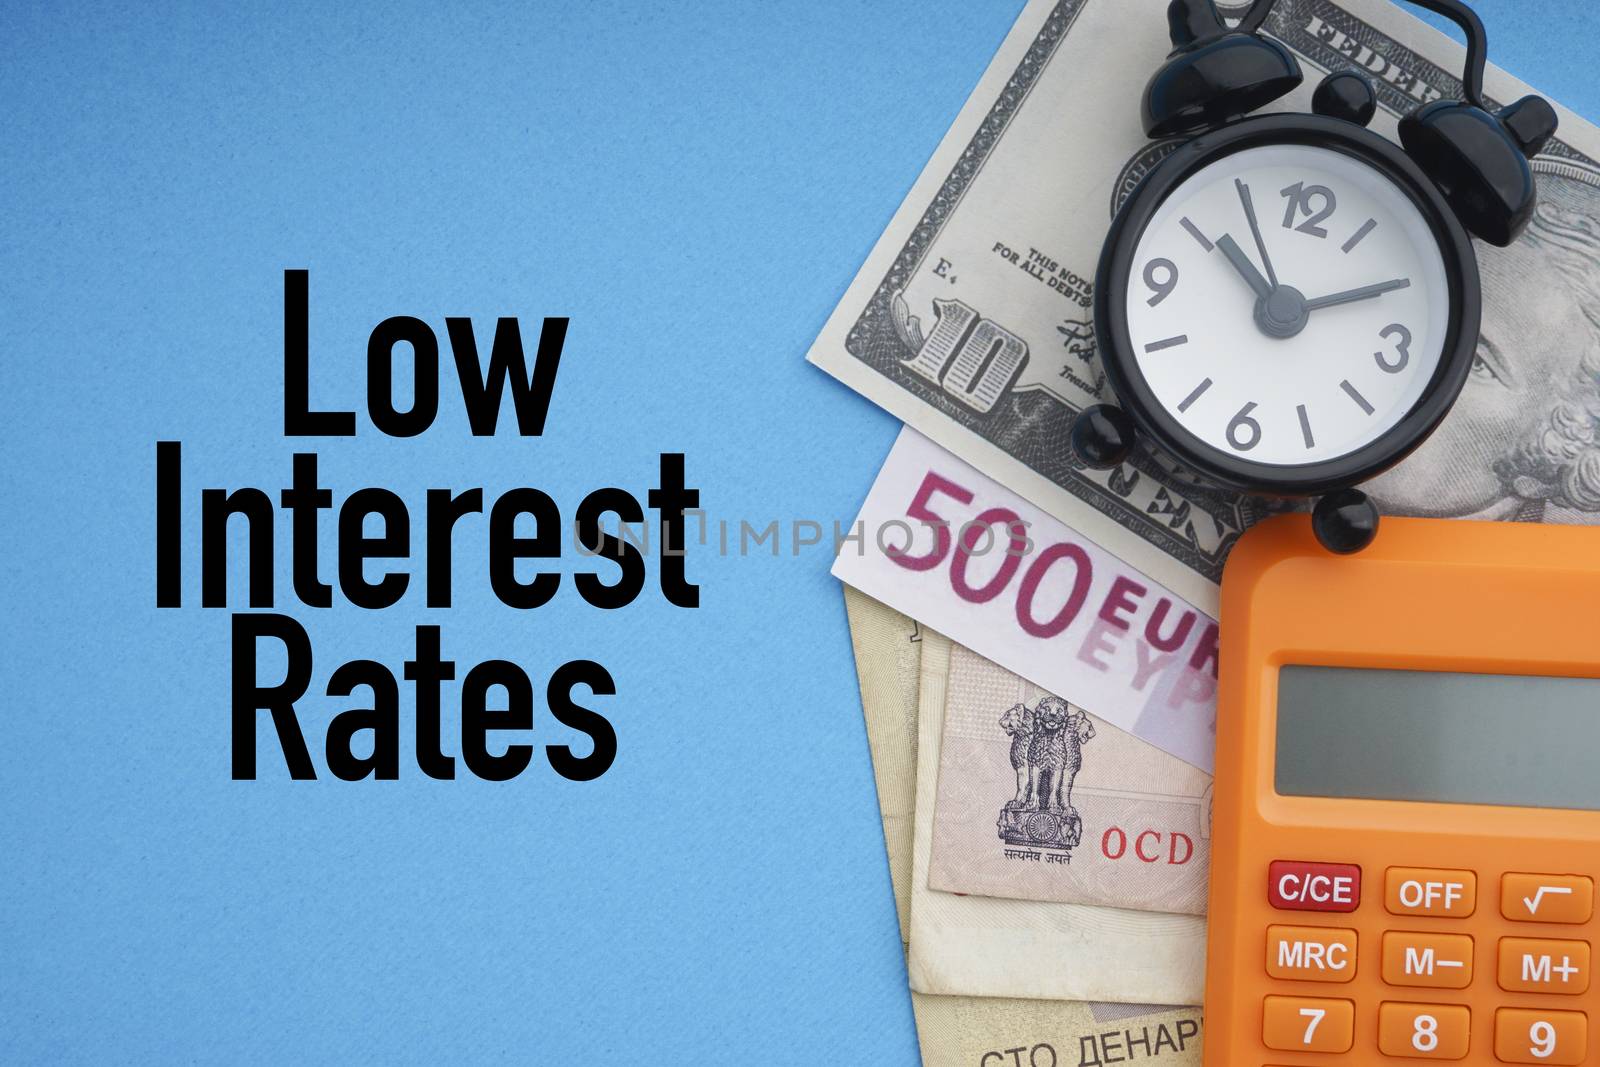 LOW INTEREST RATES text with alarm clock, banknotes currencies and calculator on blue background by silverwings